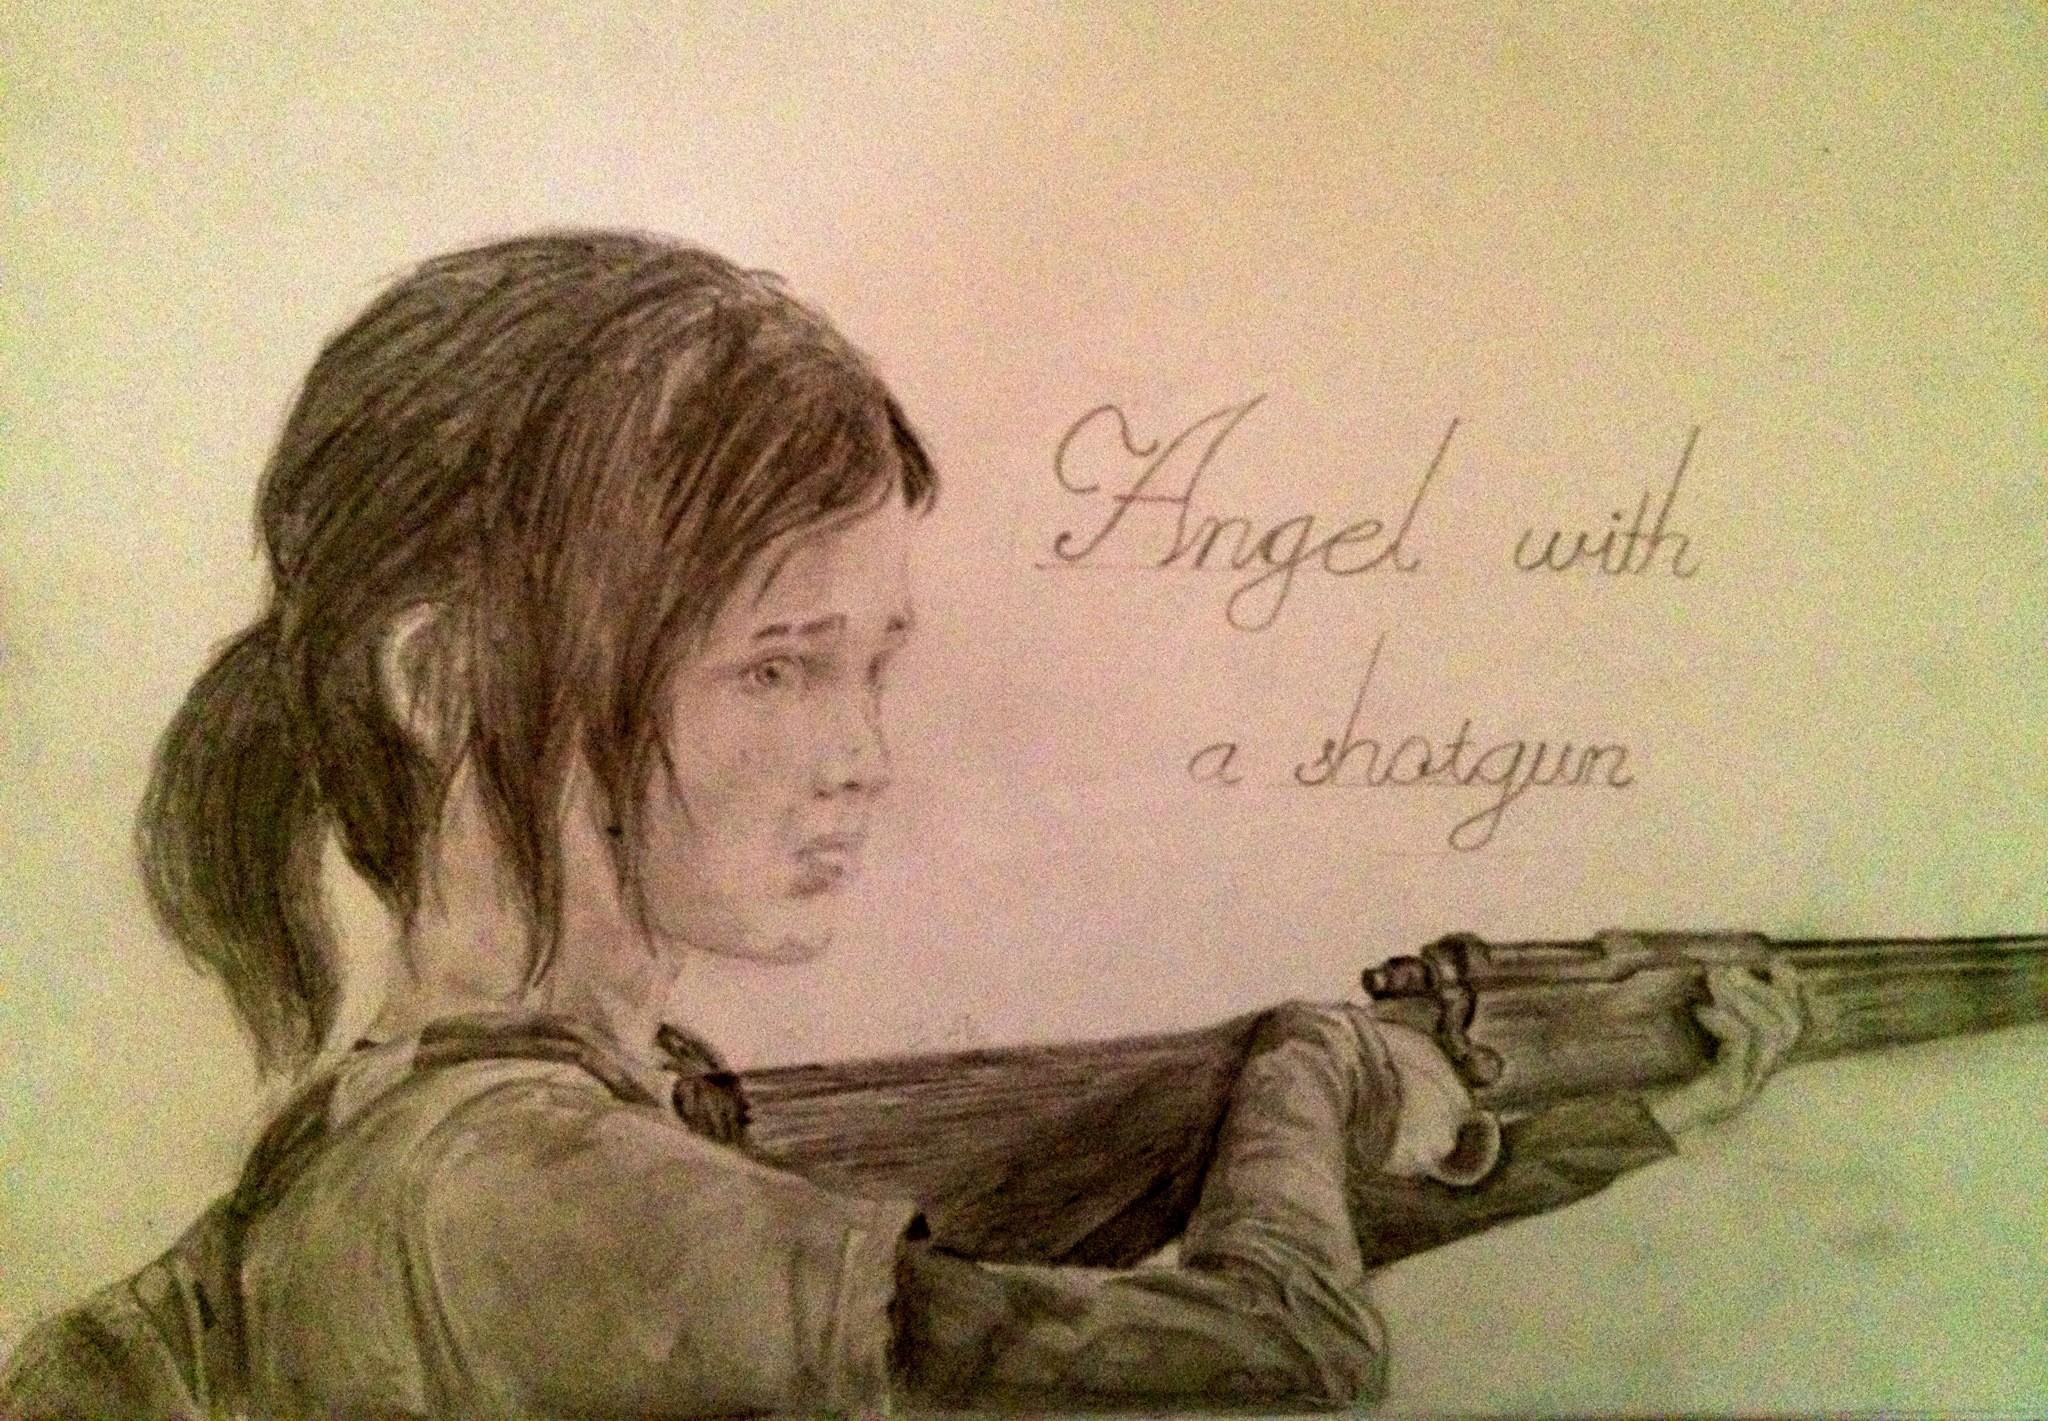 2048x1421 ... The Last Of Us- Ellie, an angel with a shotgun by zakValkyrie